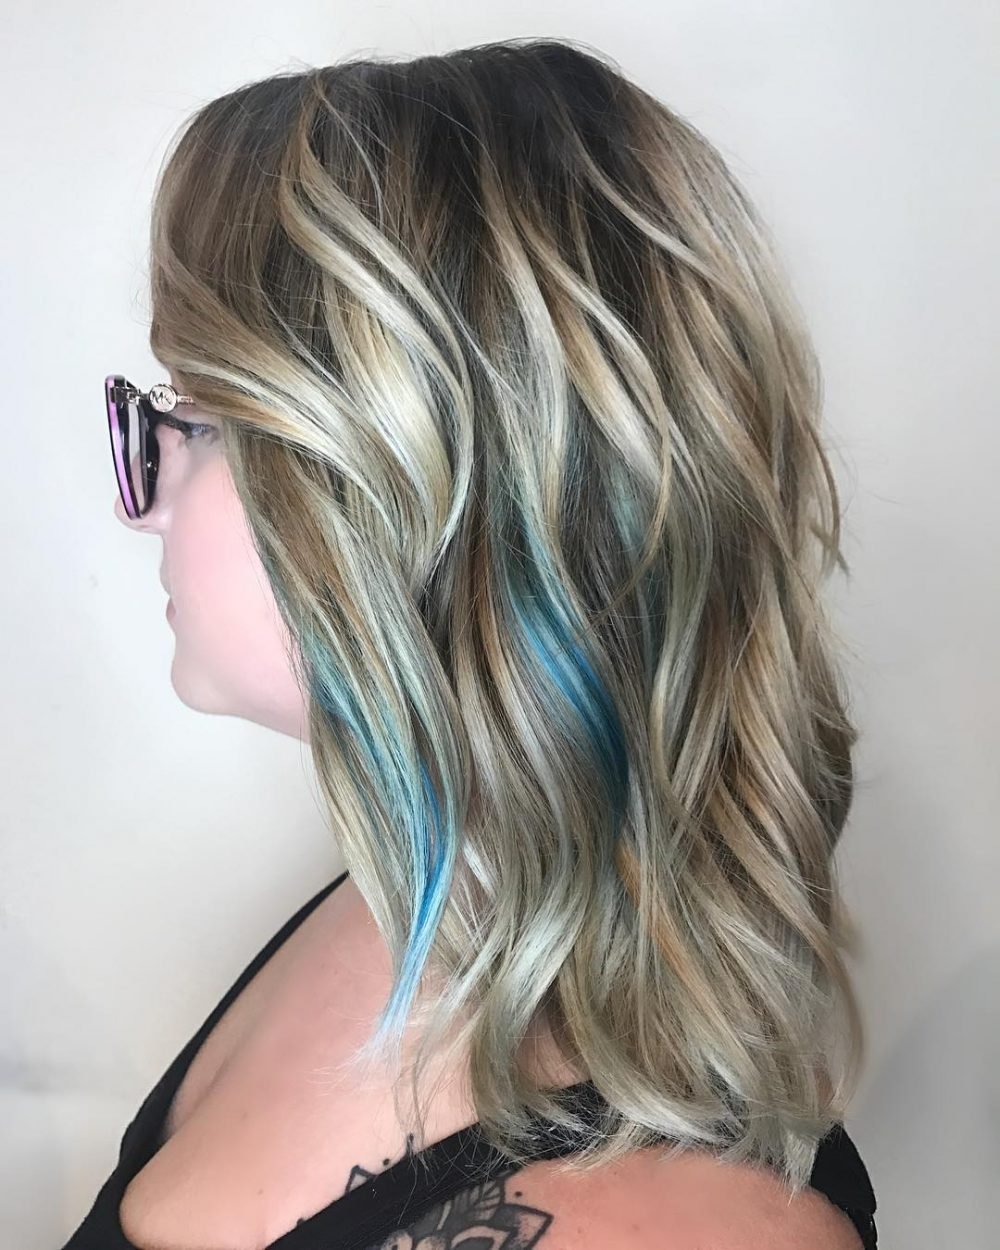 Layered Hair with Blonde Highlights and Blue Peekaboo Highlights